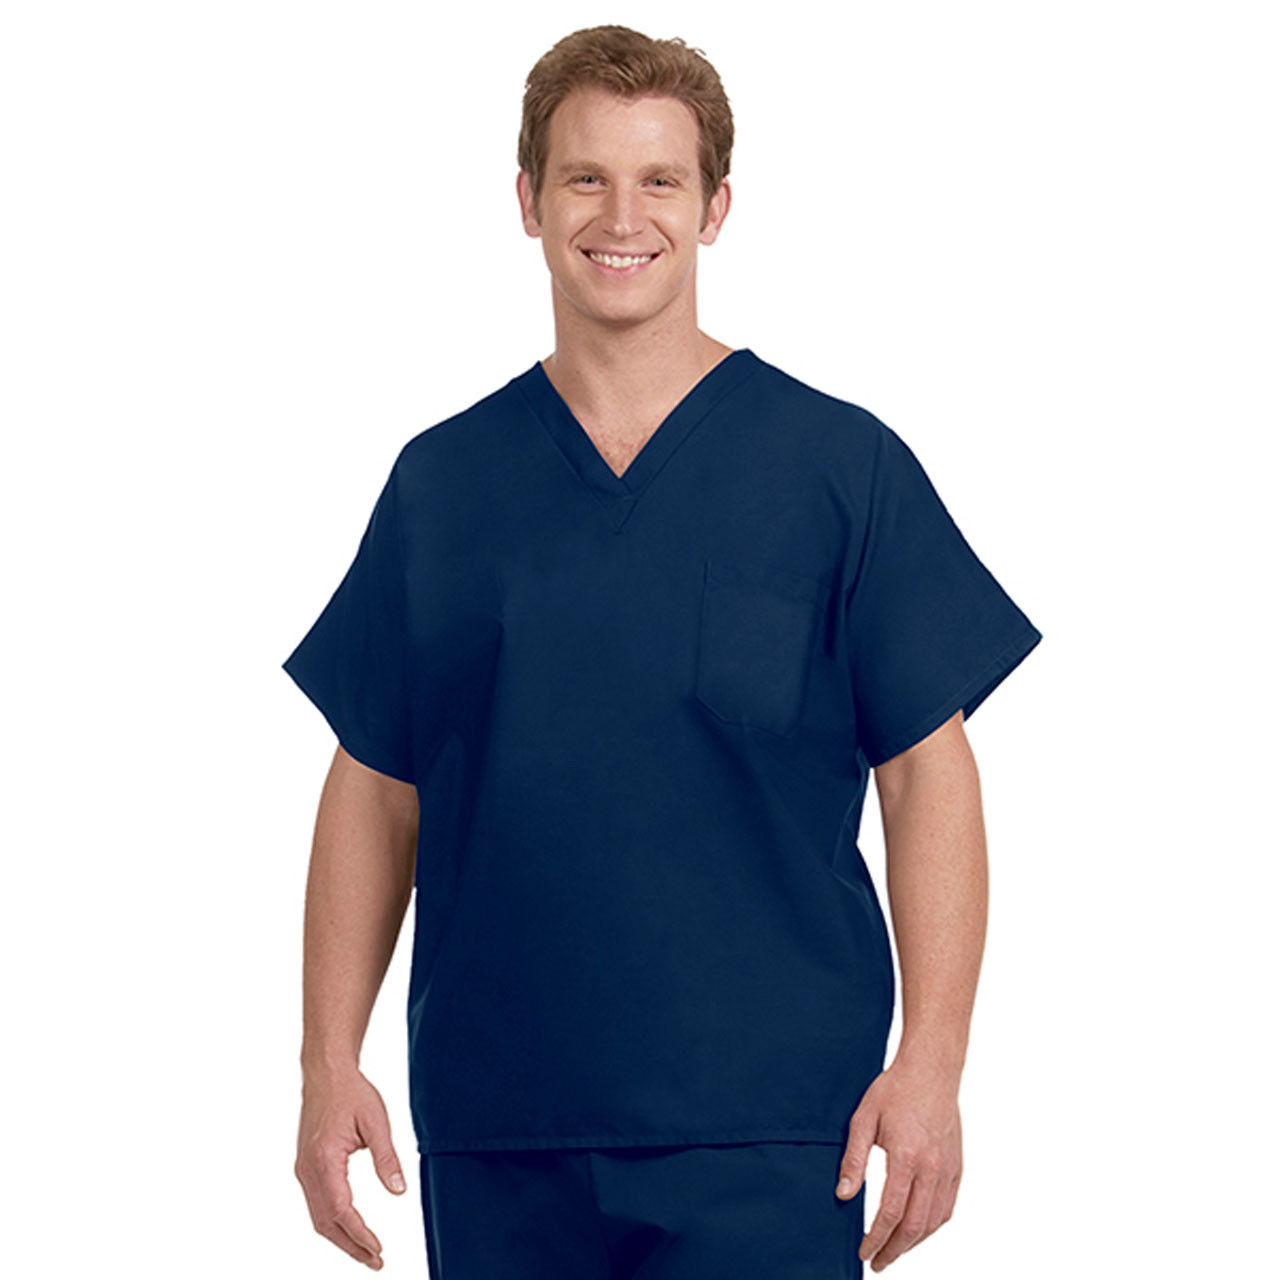 What is the fabric composition of Fashion Seal's Tall Scrub Tops?